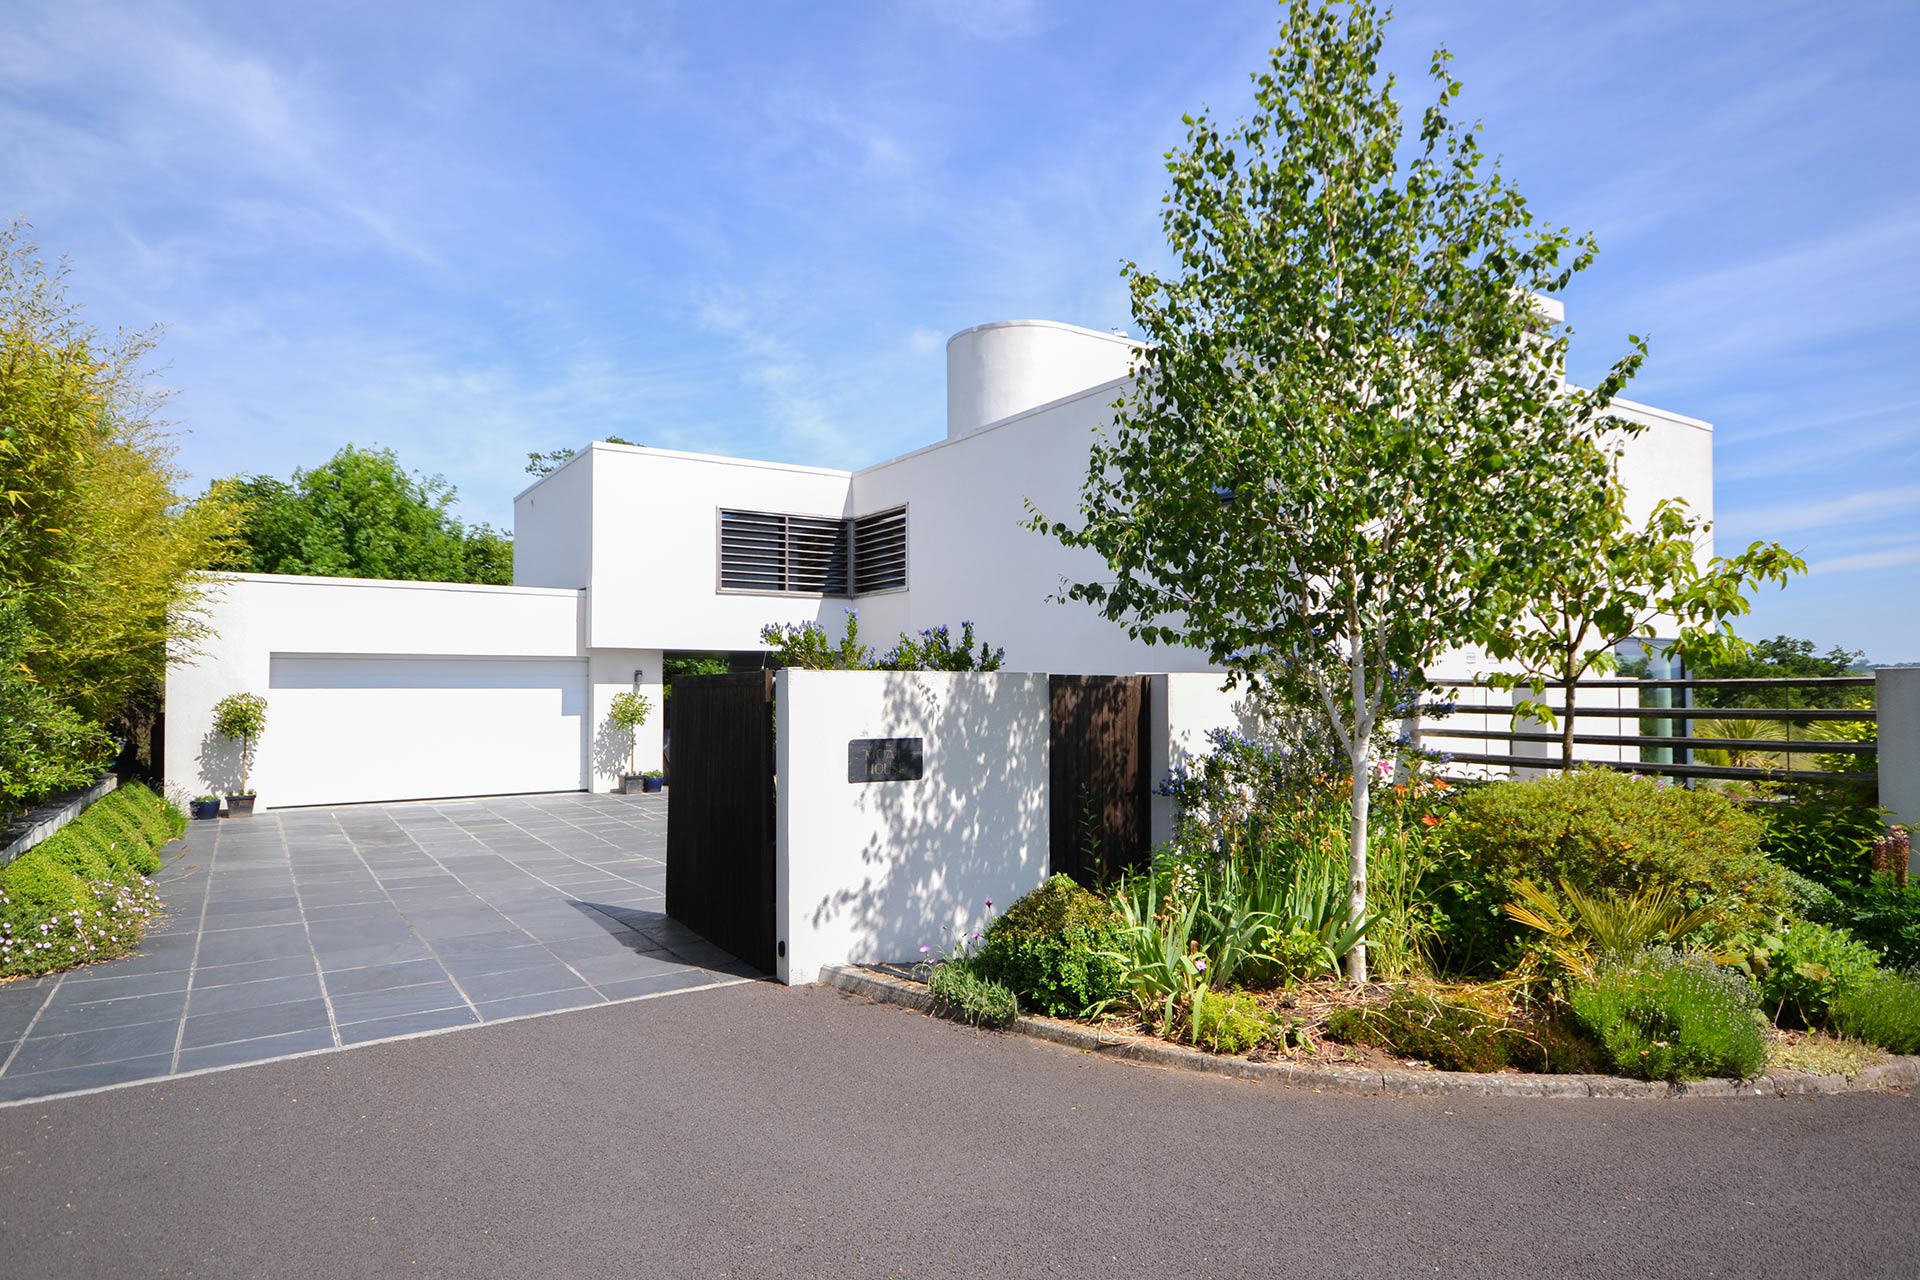 approach view to modern house with white wall and trees & plants in front